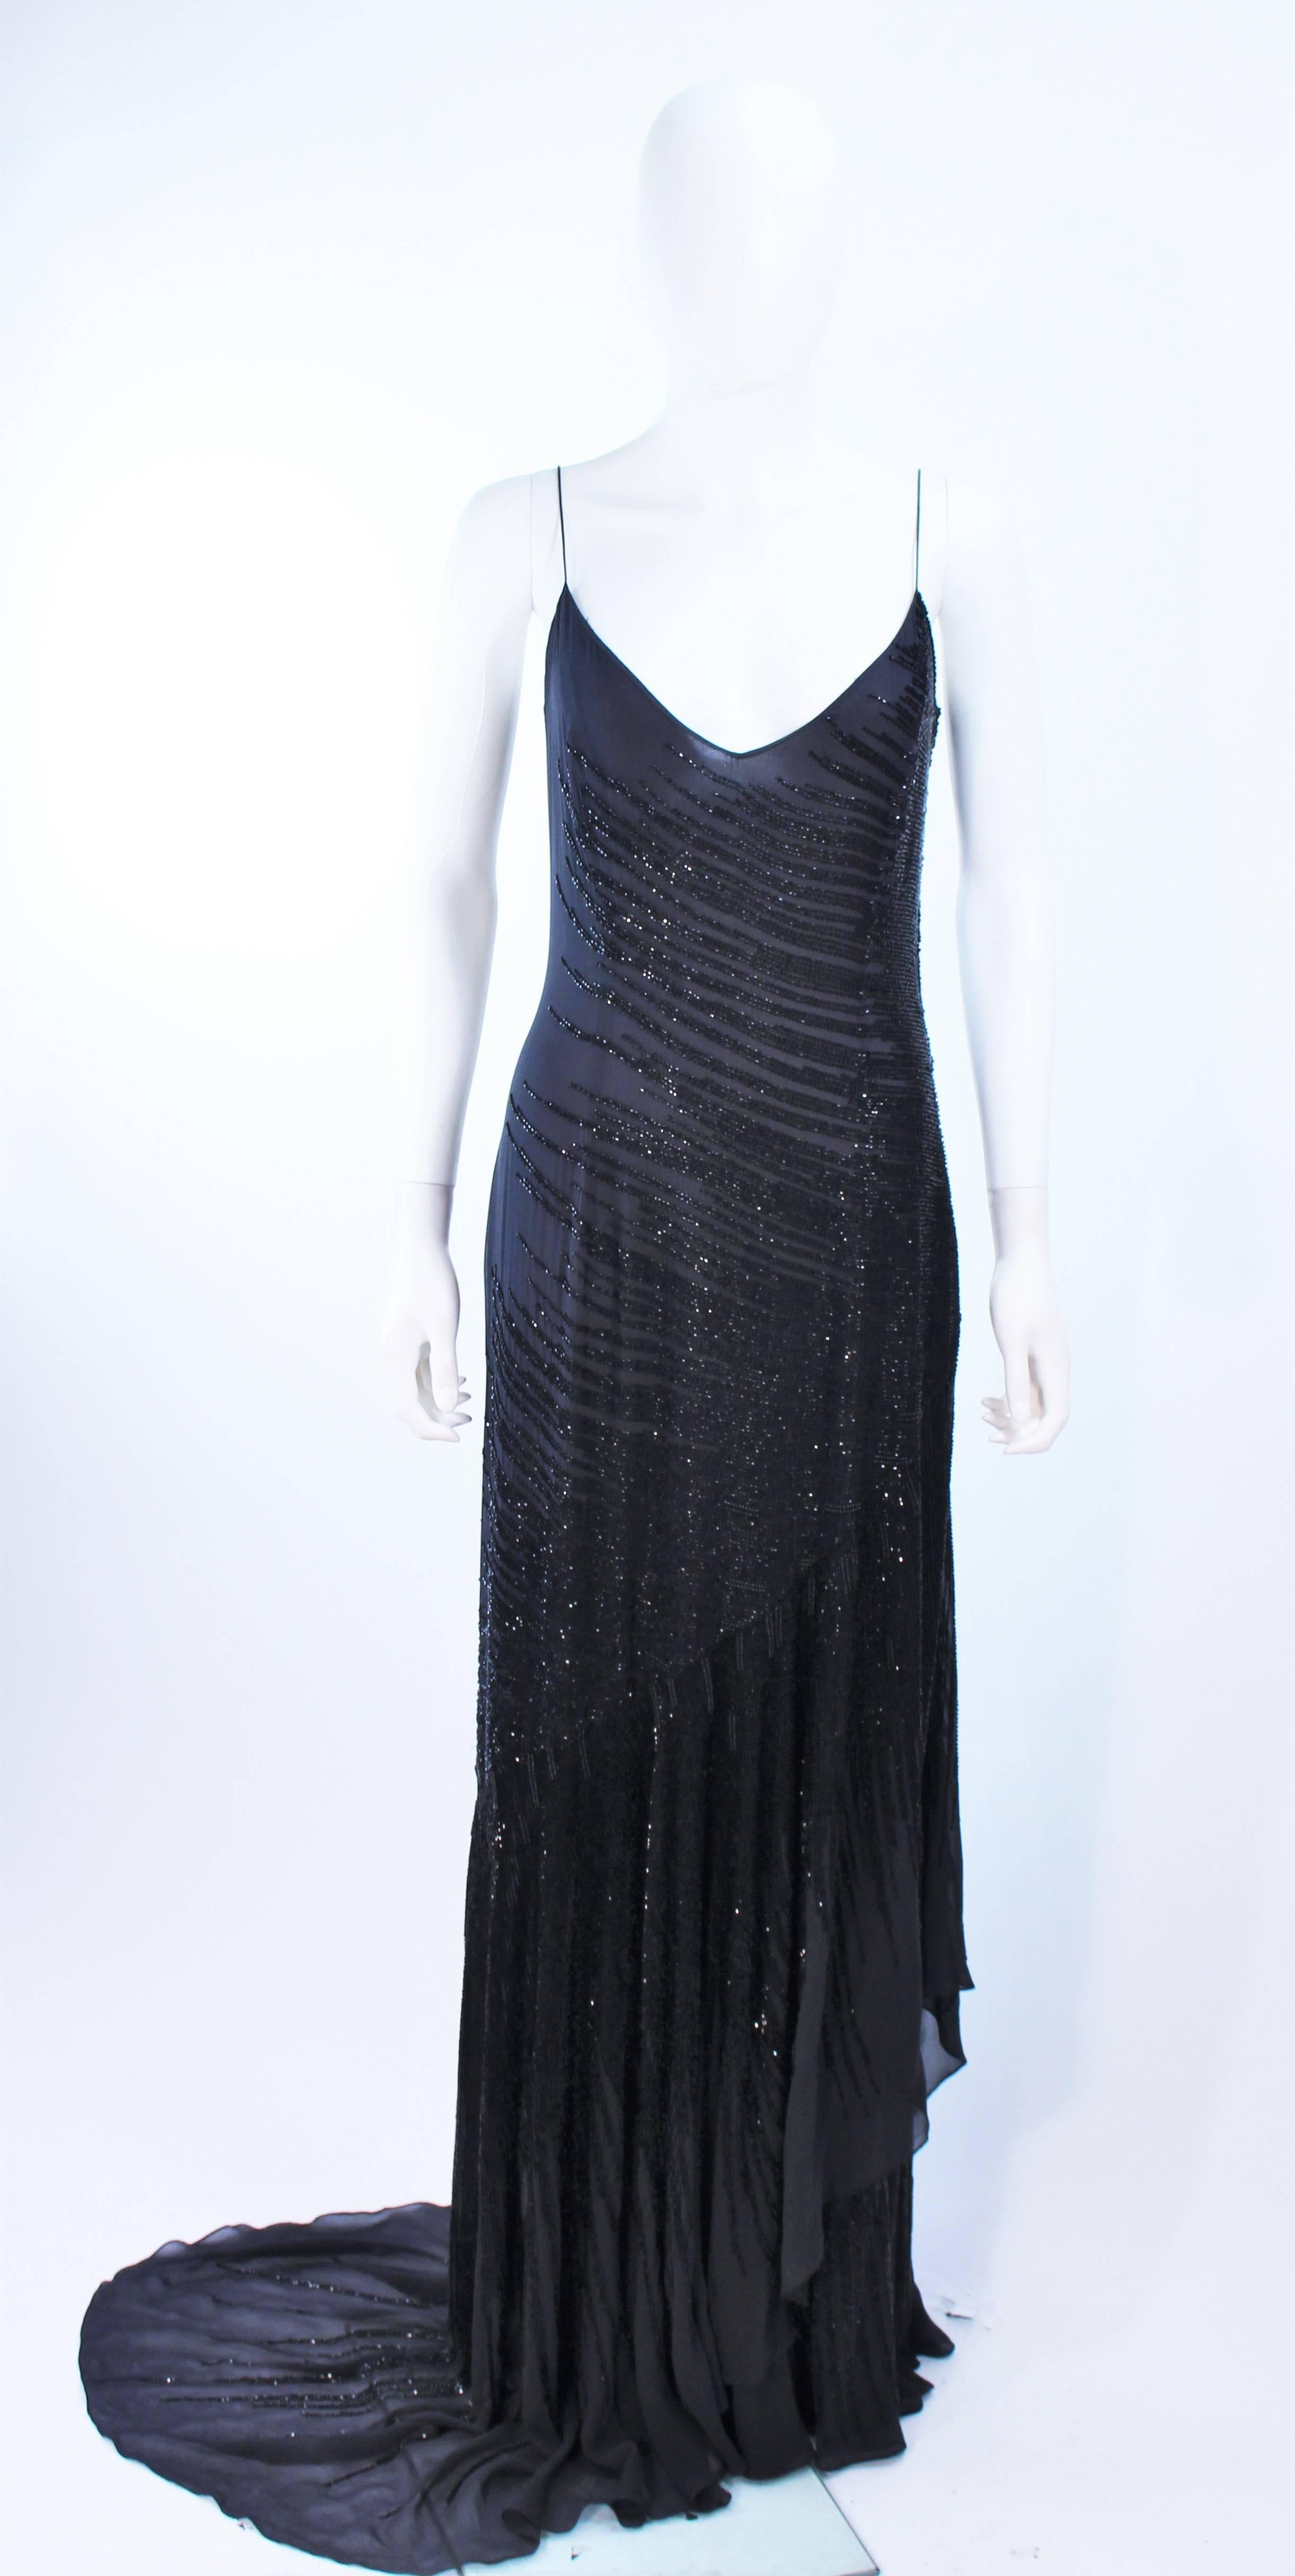 This Amanda Wakely gown is composed of a beaded black silk chiffon. Features a side draped train and cascading layers of chiffon. There is a side back zipper closure. In excellent vintage condition.

**Please cross-reference measurements for